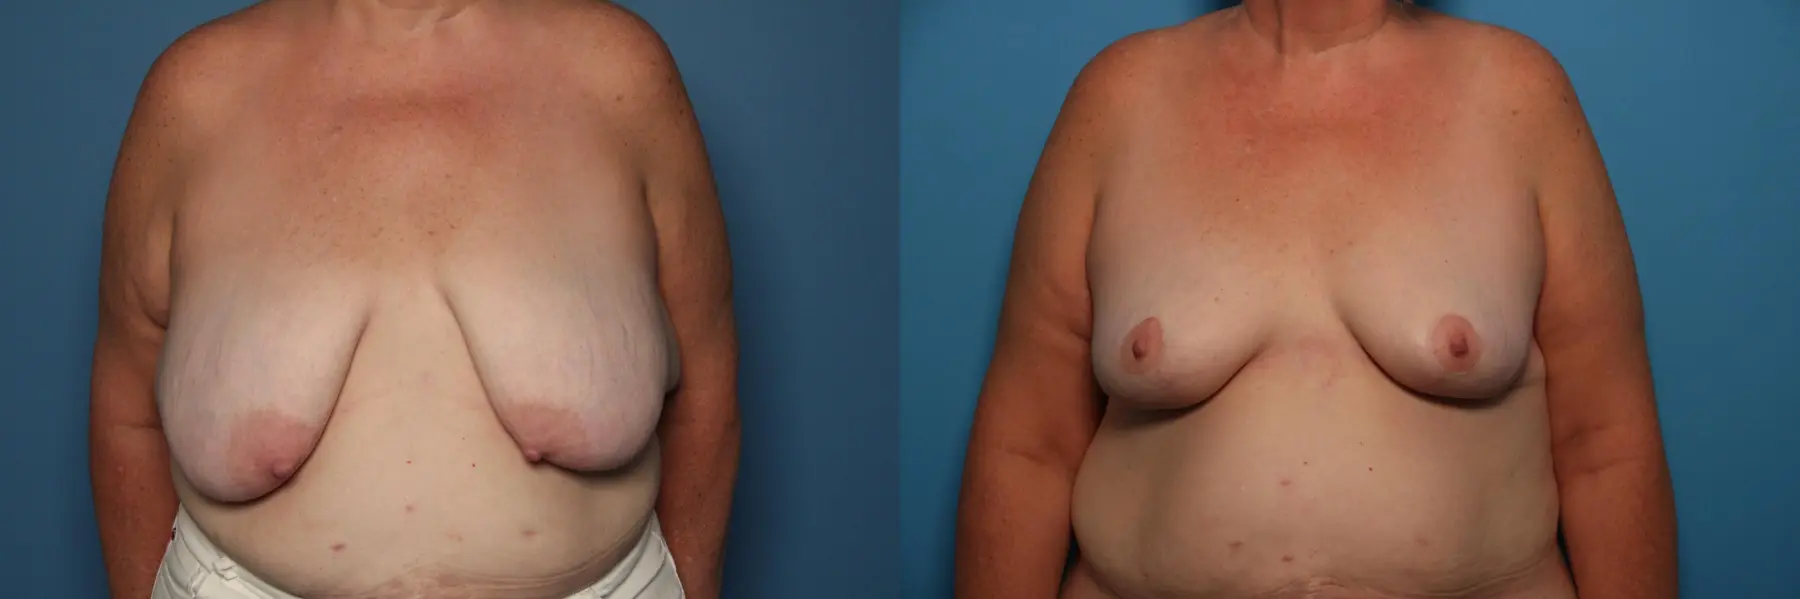 Breast Lift-Reduction: Patient 18 - Before and After  